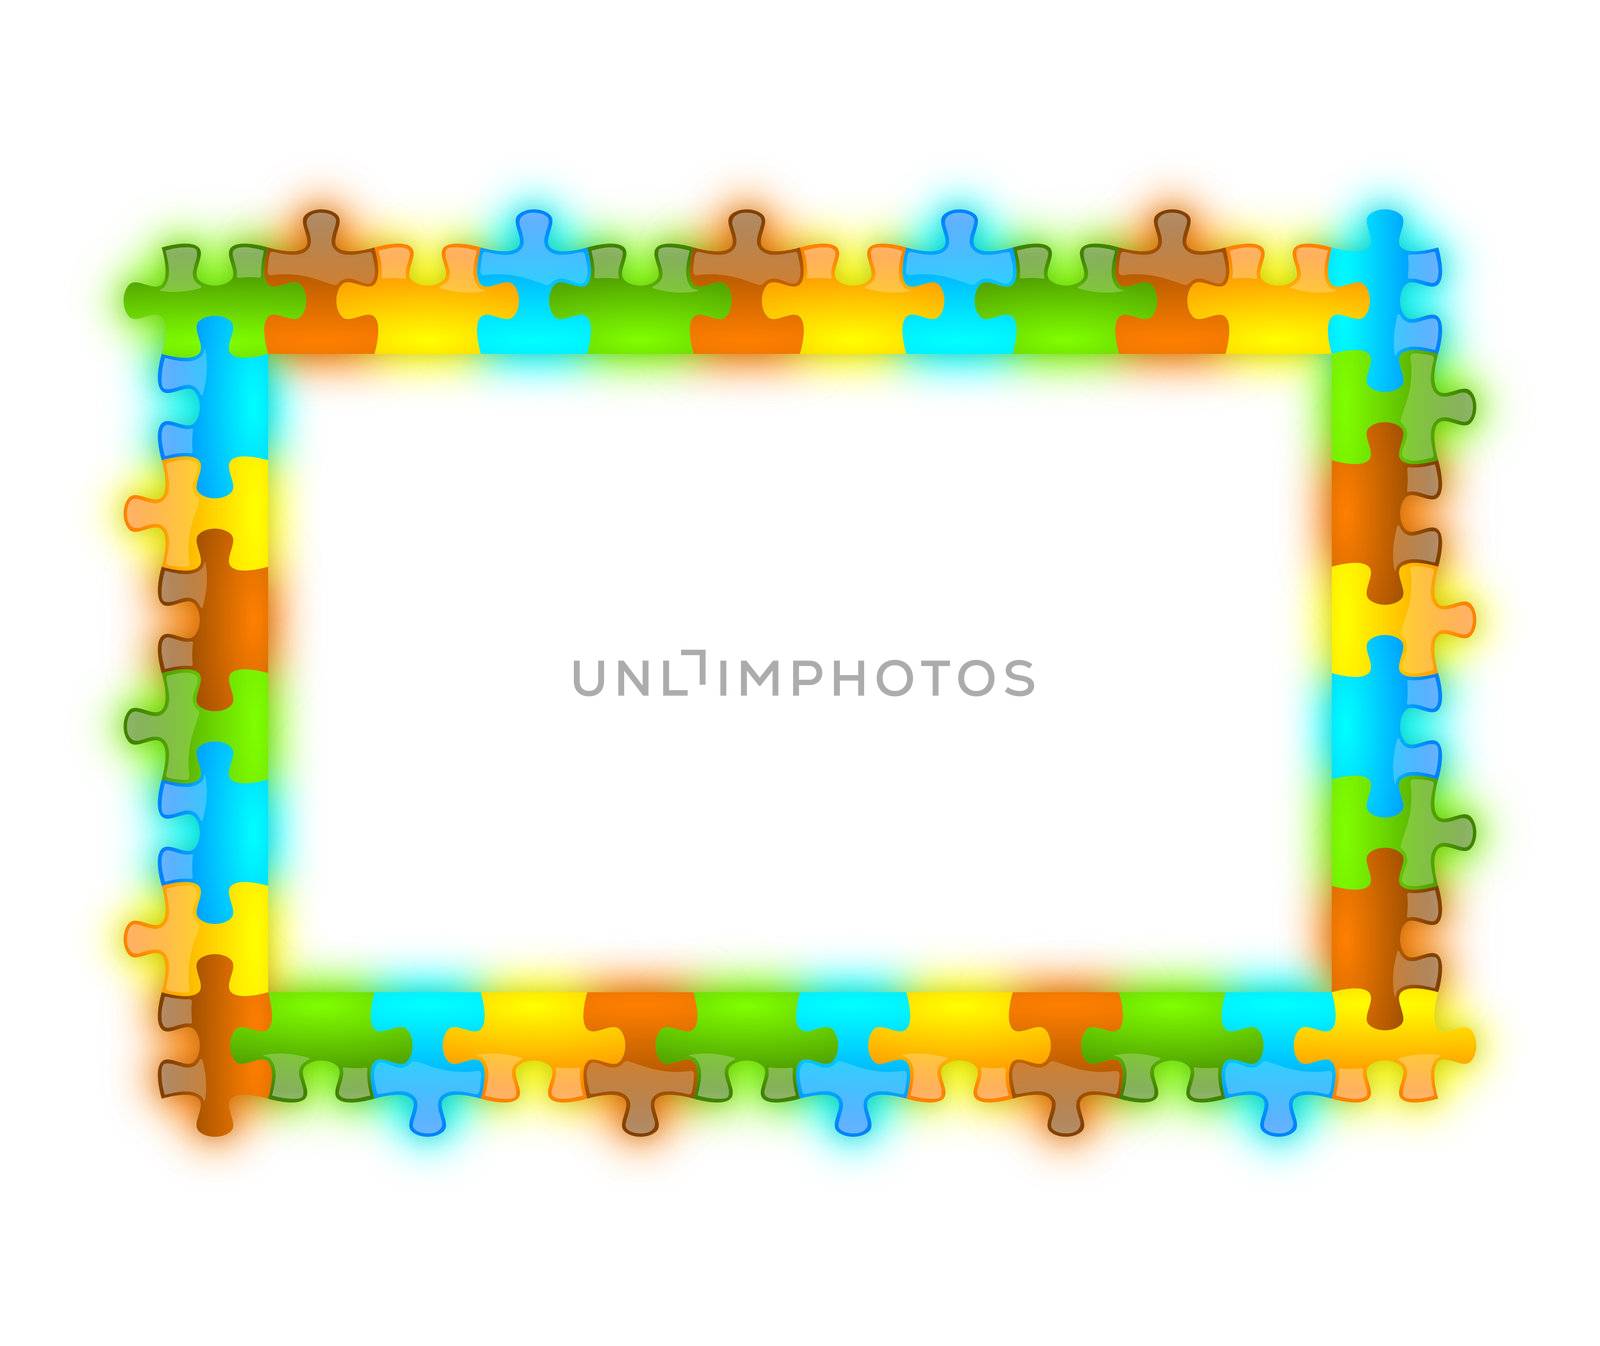 Colored, glossy, brilliant and jazzy puzzle frame 6 x 8 format with shadow